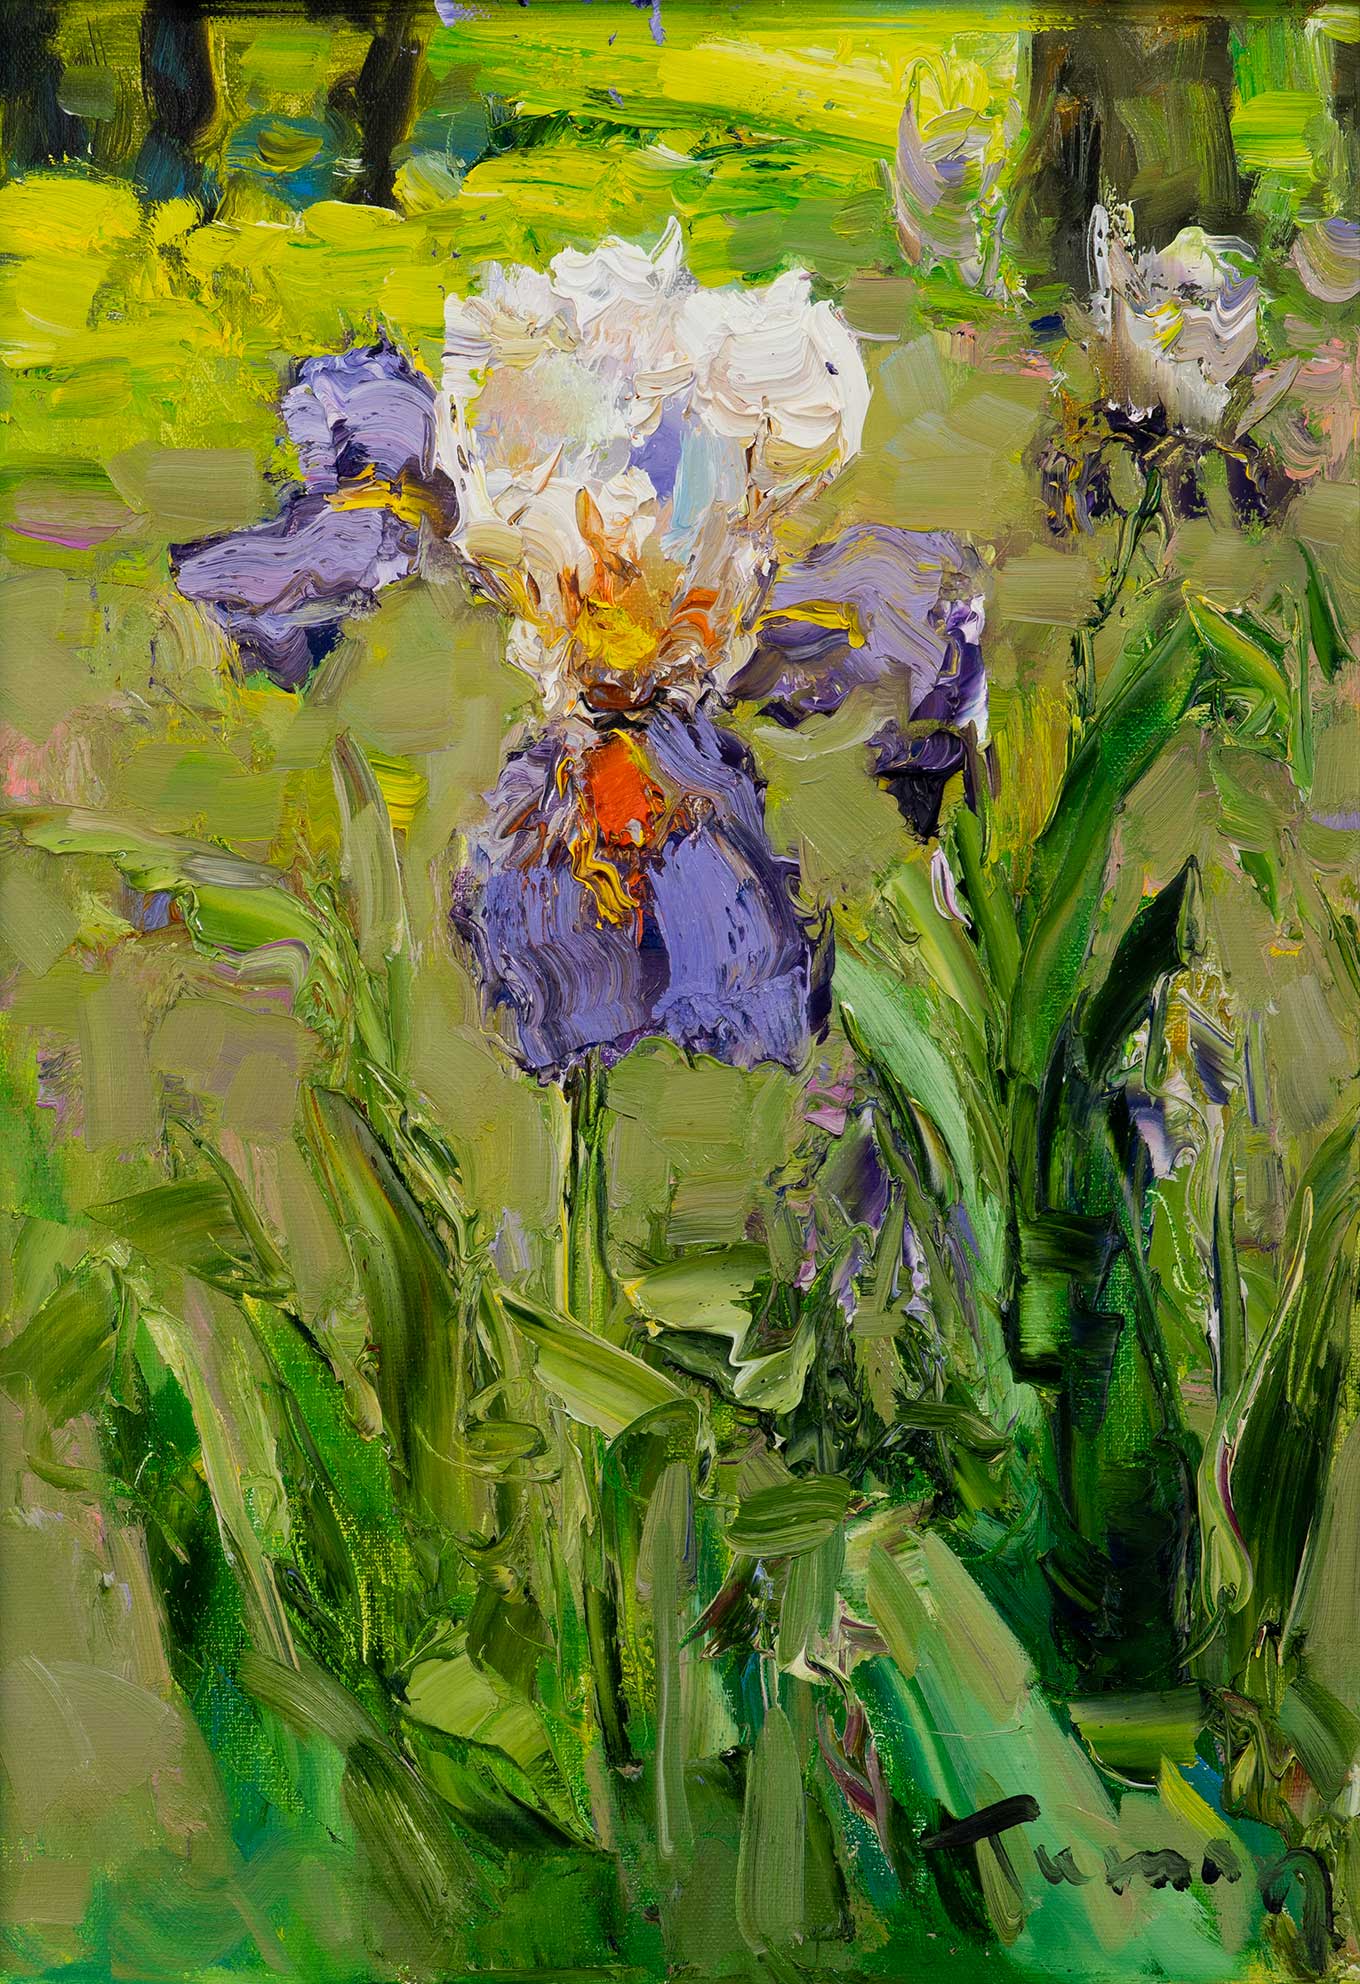 In the meadow - 1, Tuman Zhumabaev, Buy the painting Oil